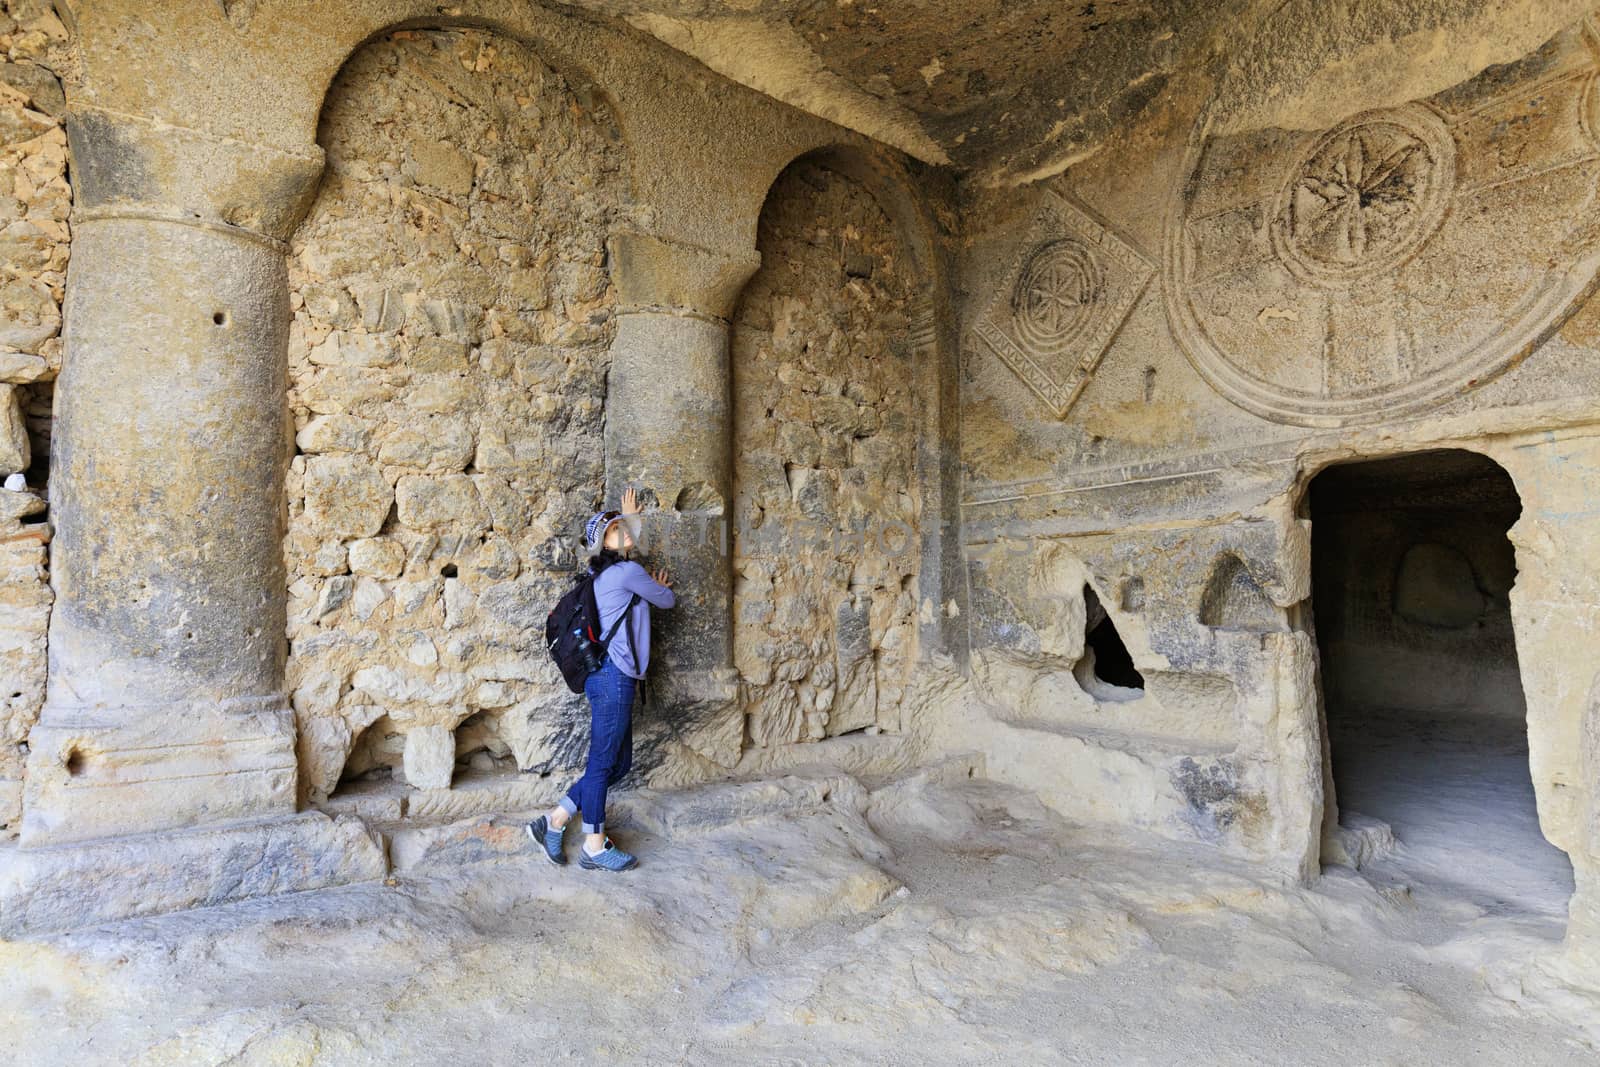 A young woman examines the interior of the old underground church's column hall, carved into a sandstone cliff. by Sergii